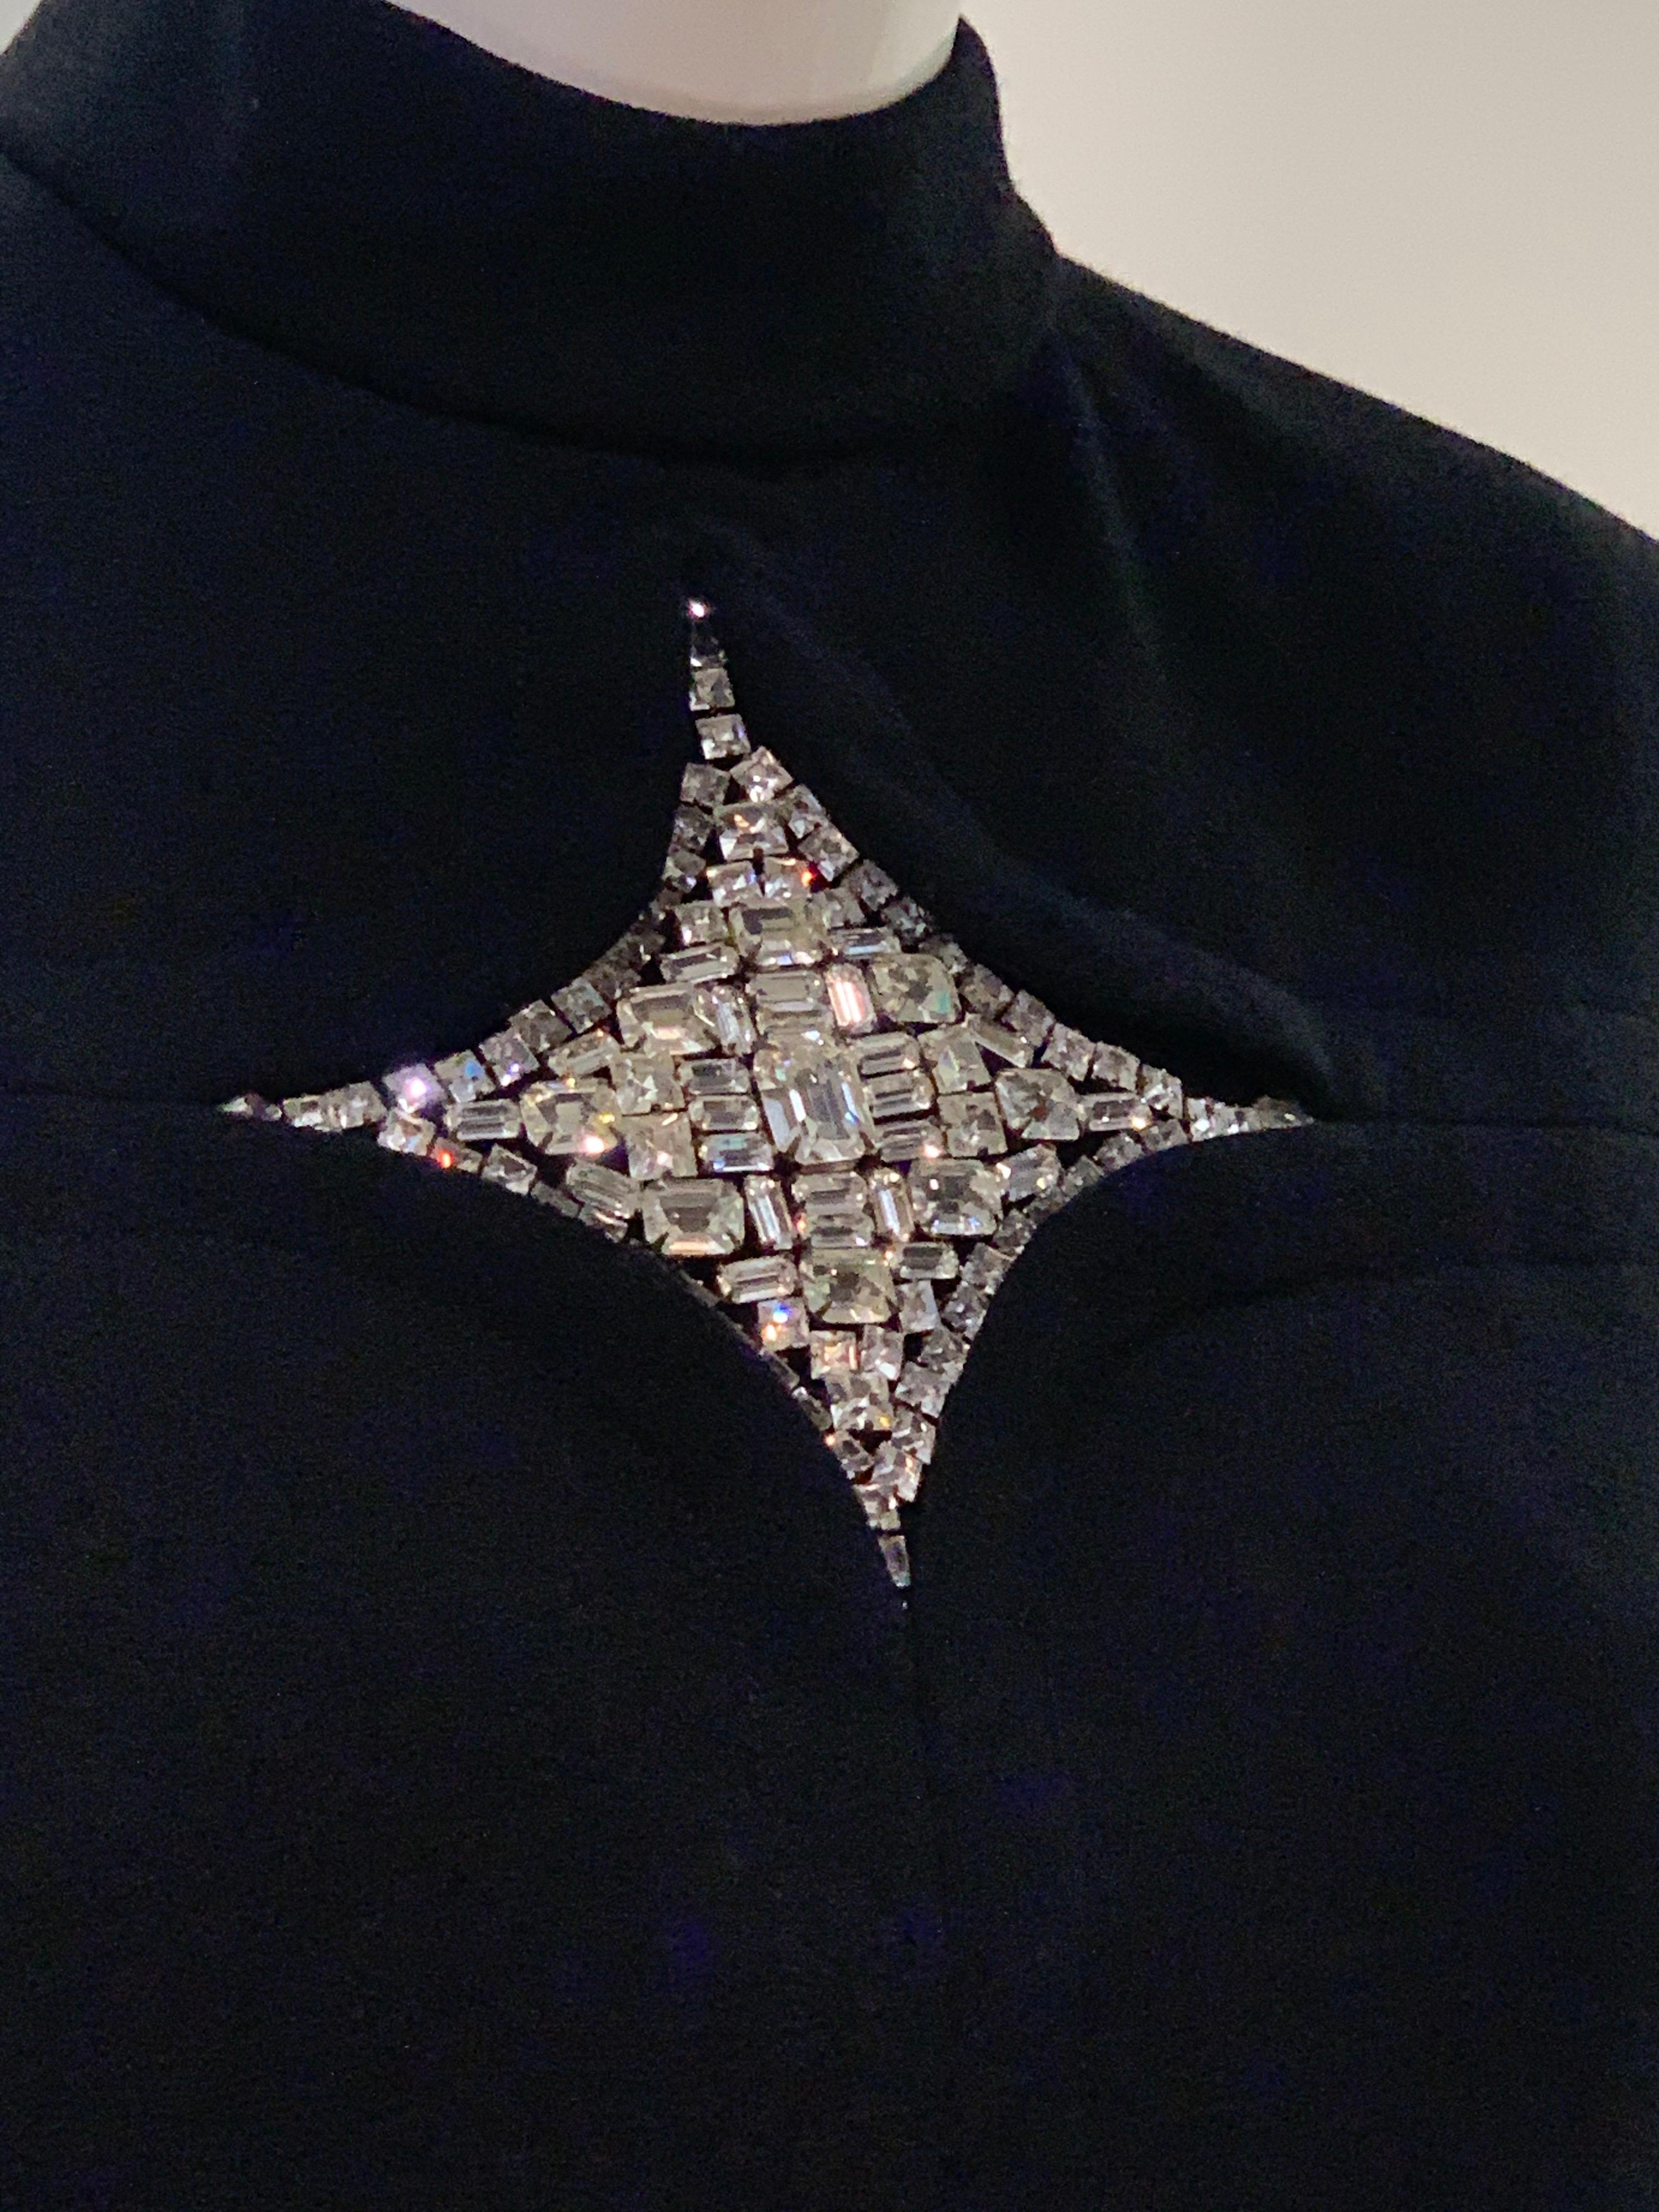 1960s Mod Wool Crepe Tailored Cocktail Dress w/ Rhinestone Star Inset at Center For Sale 9